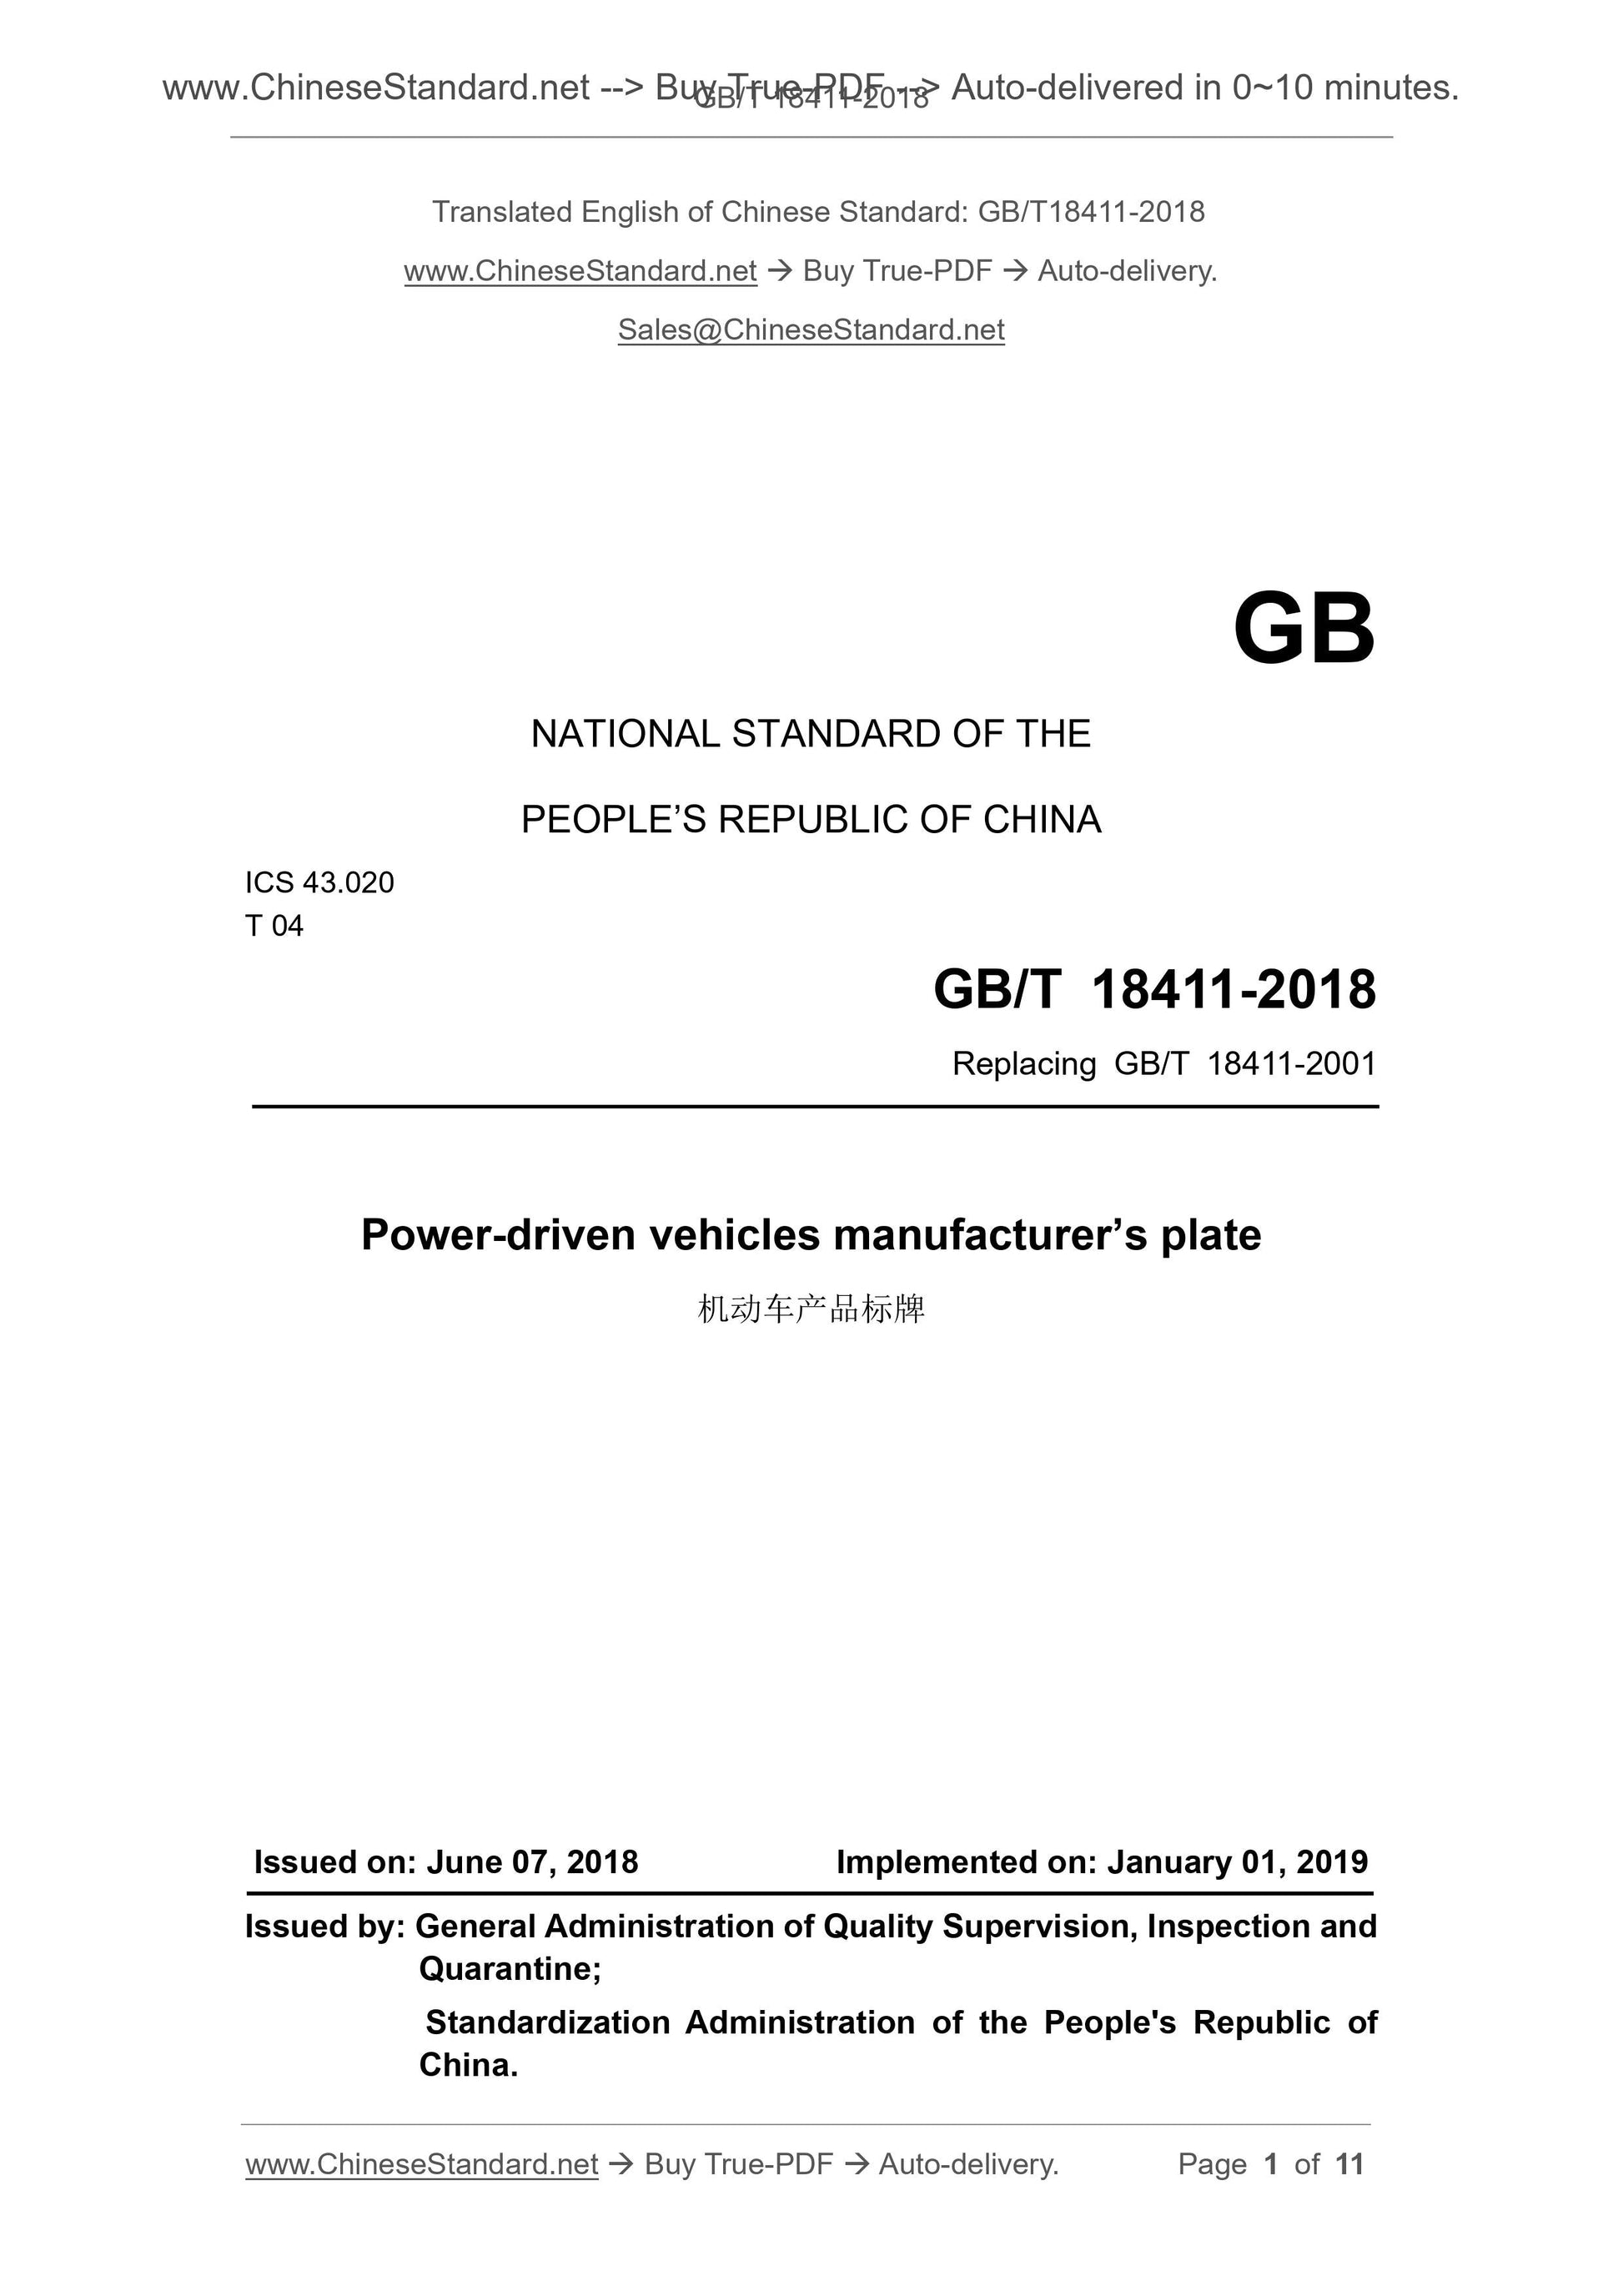 GB/T 18411-2018 Page 1